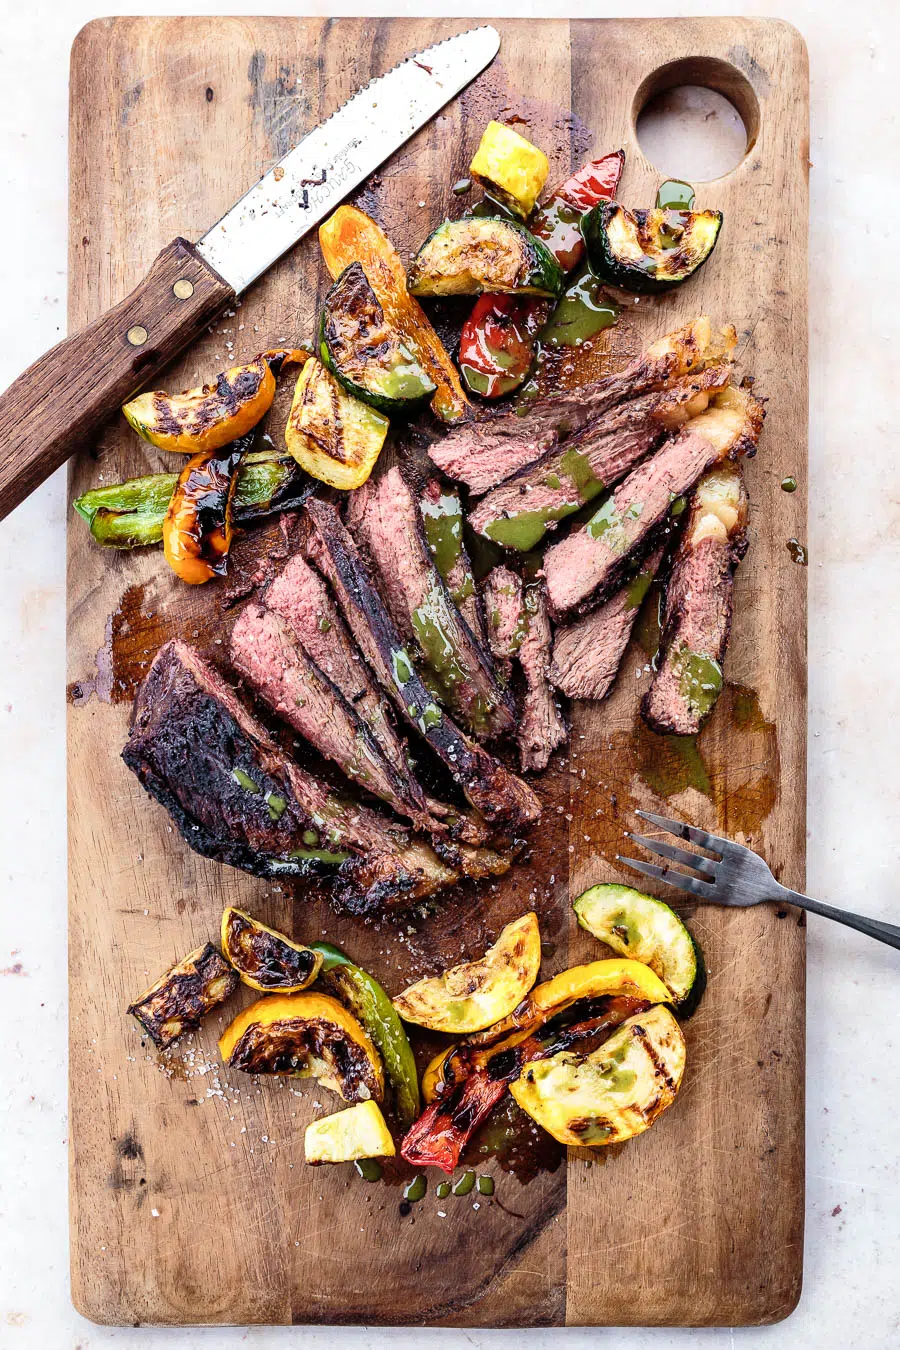 Sliced grilled picanha steak with roasted vegetables and chimichurri sauce served on a wooden cutting board. A fork and a steak knife are sitting on opposite end of the board.